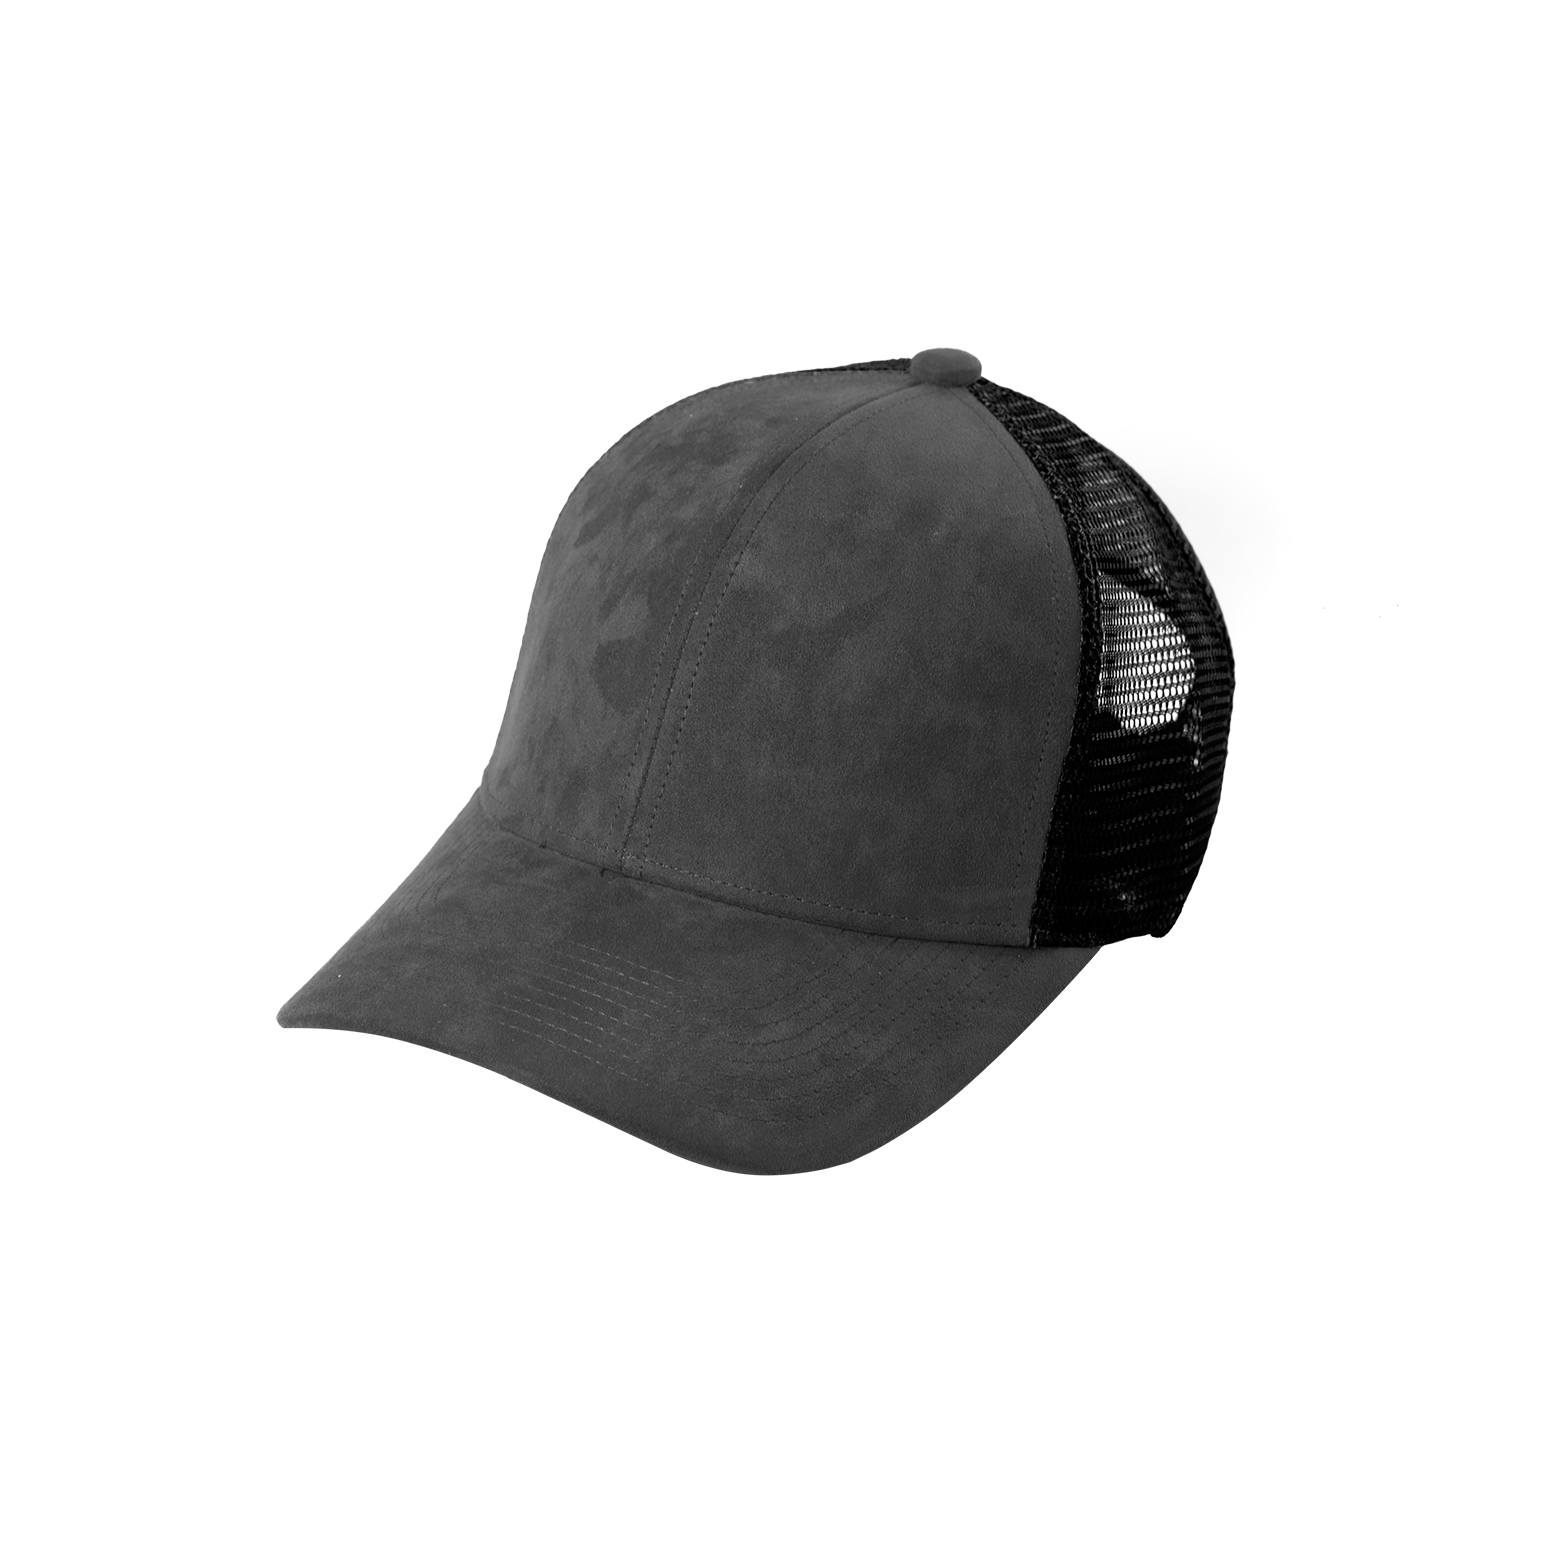 TRUCKER CAP ANTHRACITE SUEDE FRONT SIDE